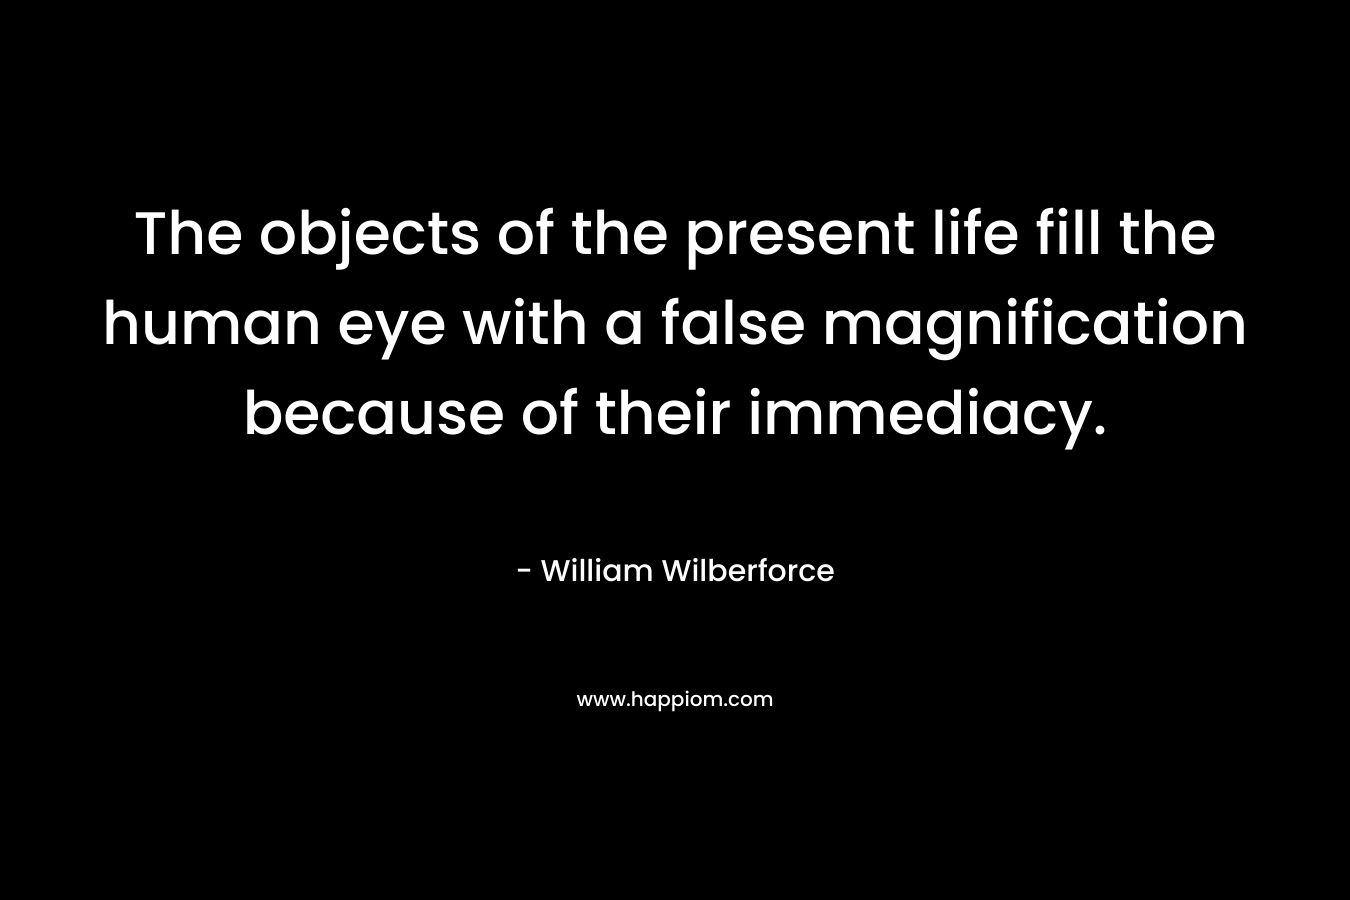 The objects of the present life fill the human eye with a false magnification because of their immediacy. – William Wilberforce